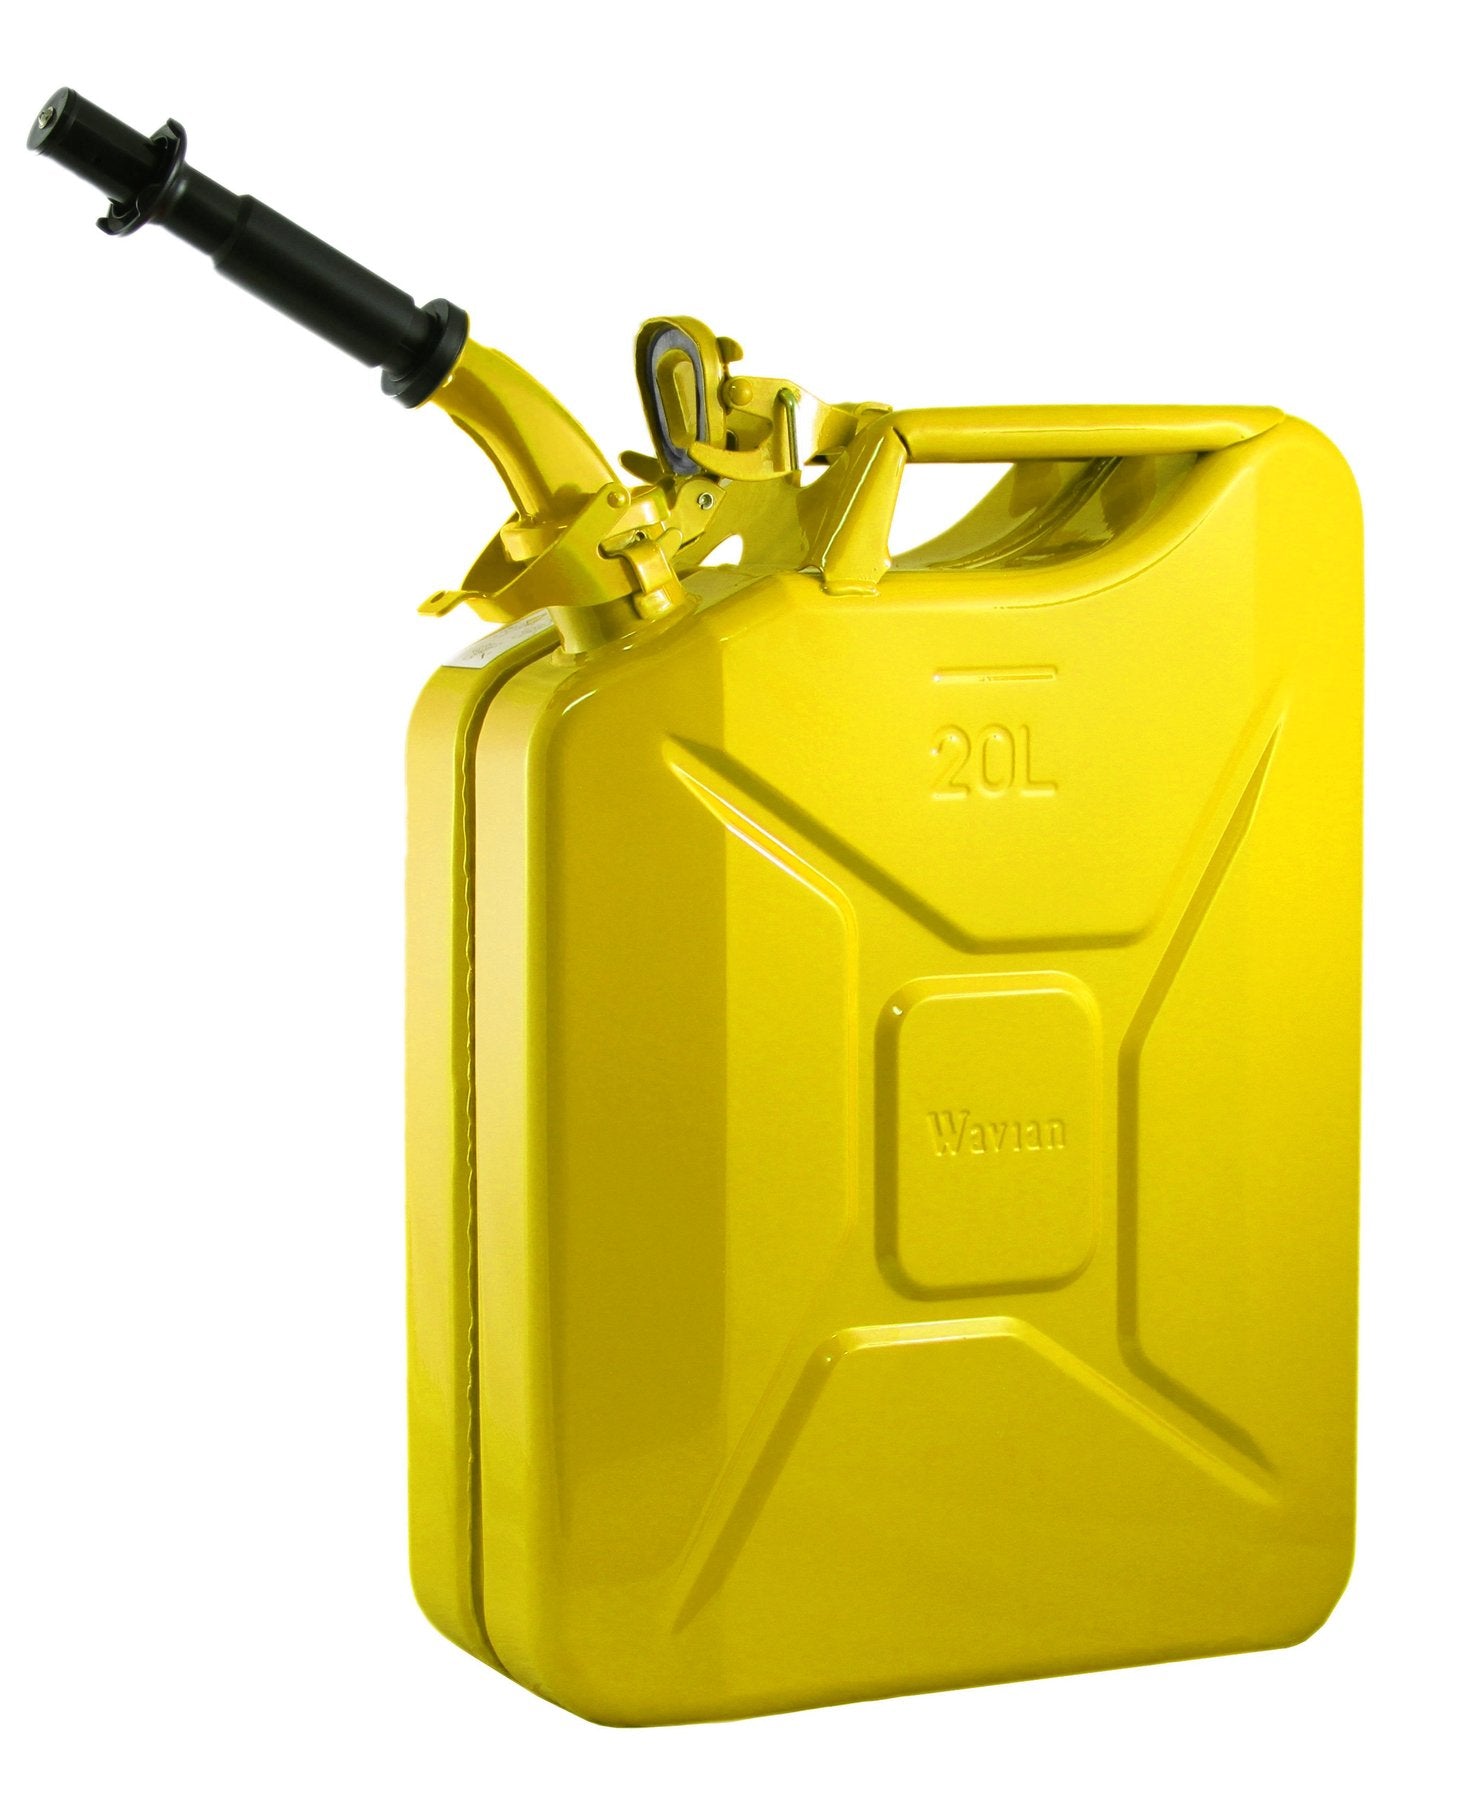 Wavian Yellow 20L Gas Can with Nozzle